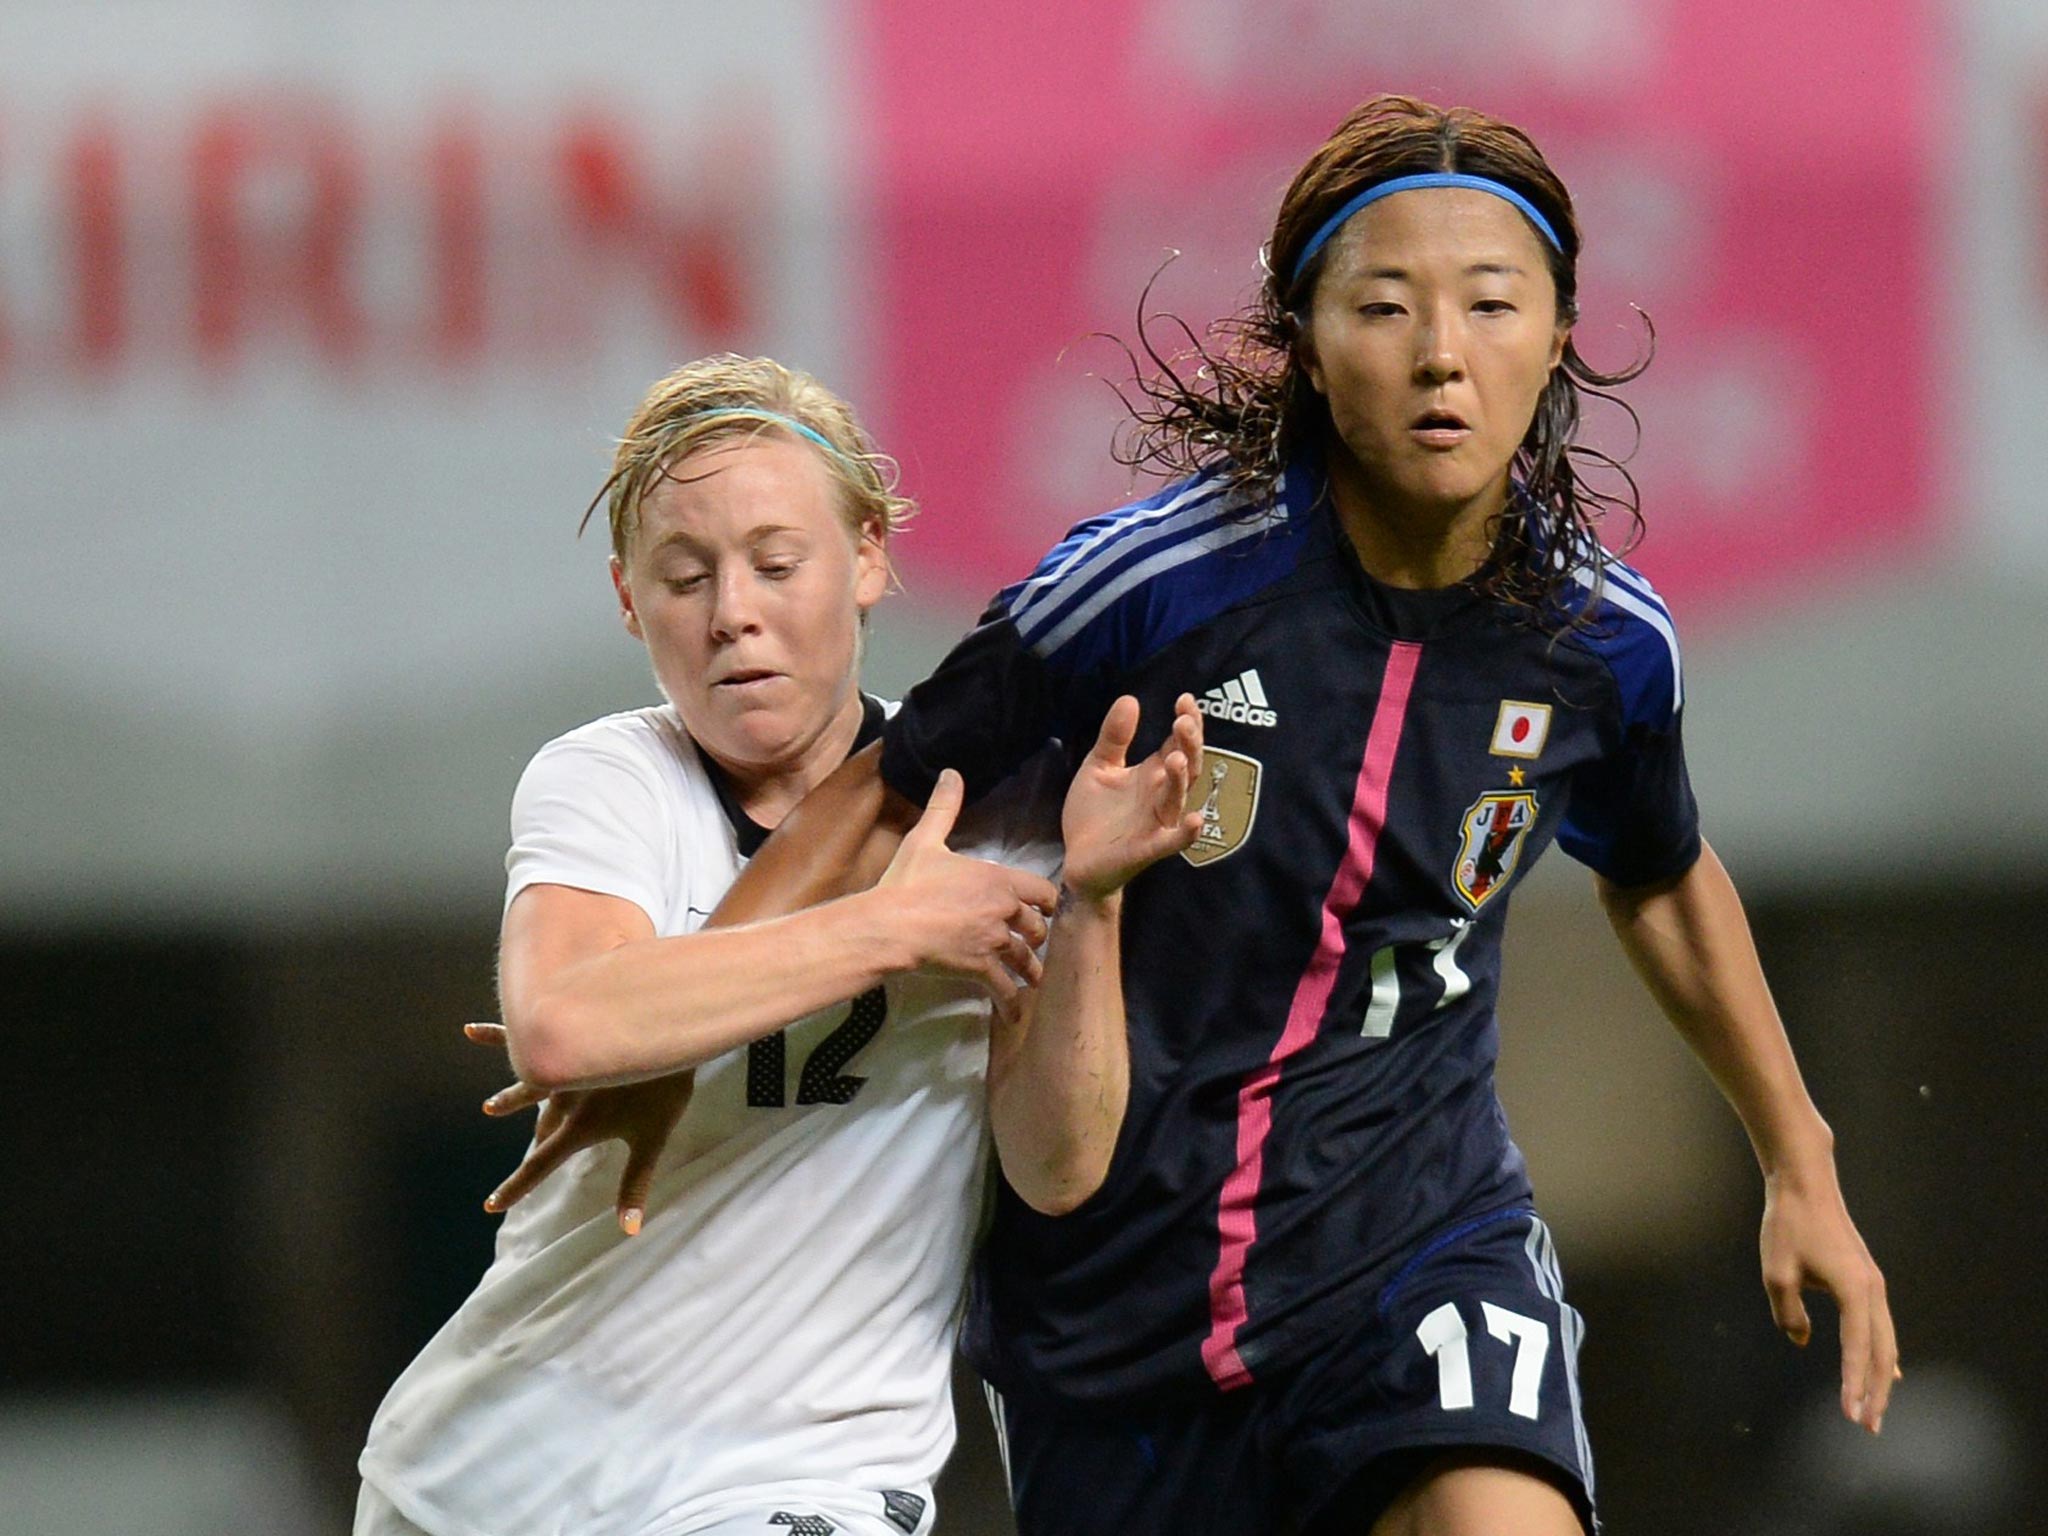 New Zealand’s Betsy Hassett (left) has signed for Manchester City, while World Cup-winner Yuki Ogimi will play for Chelsea in this season’s Women’s Super League